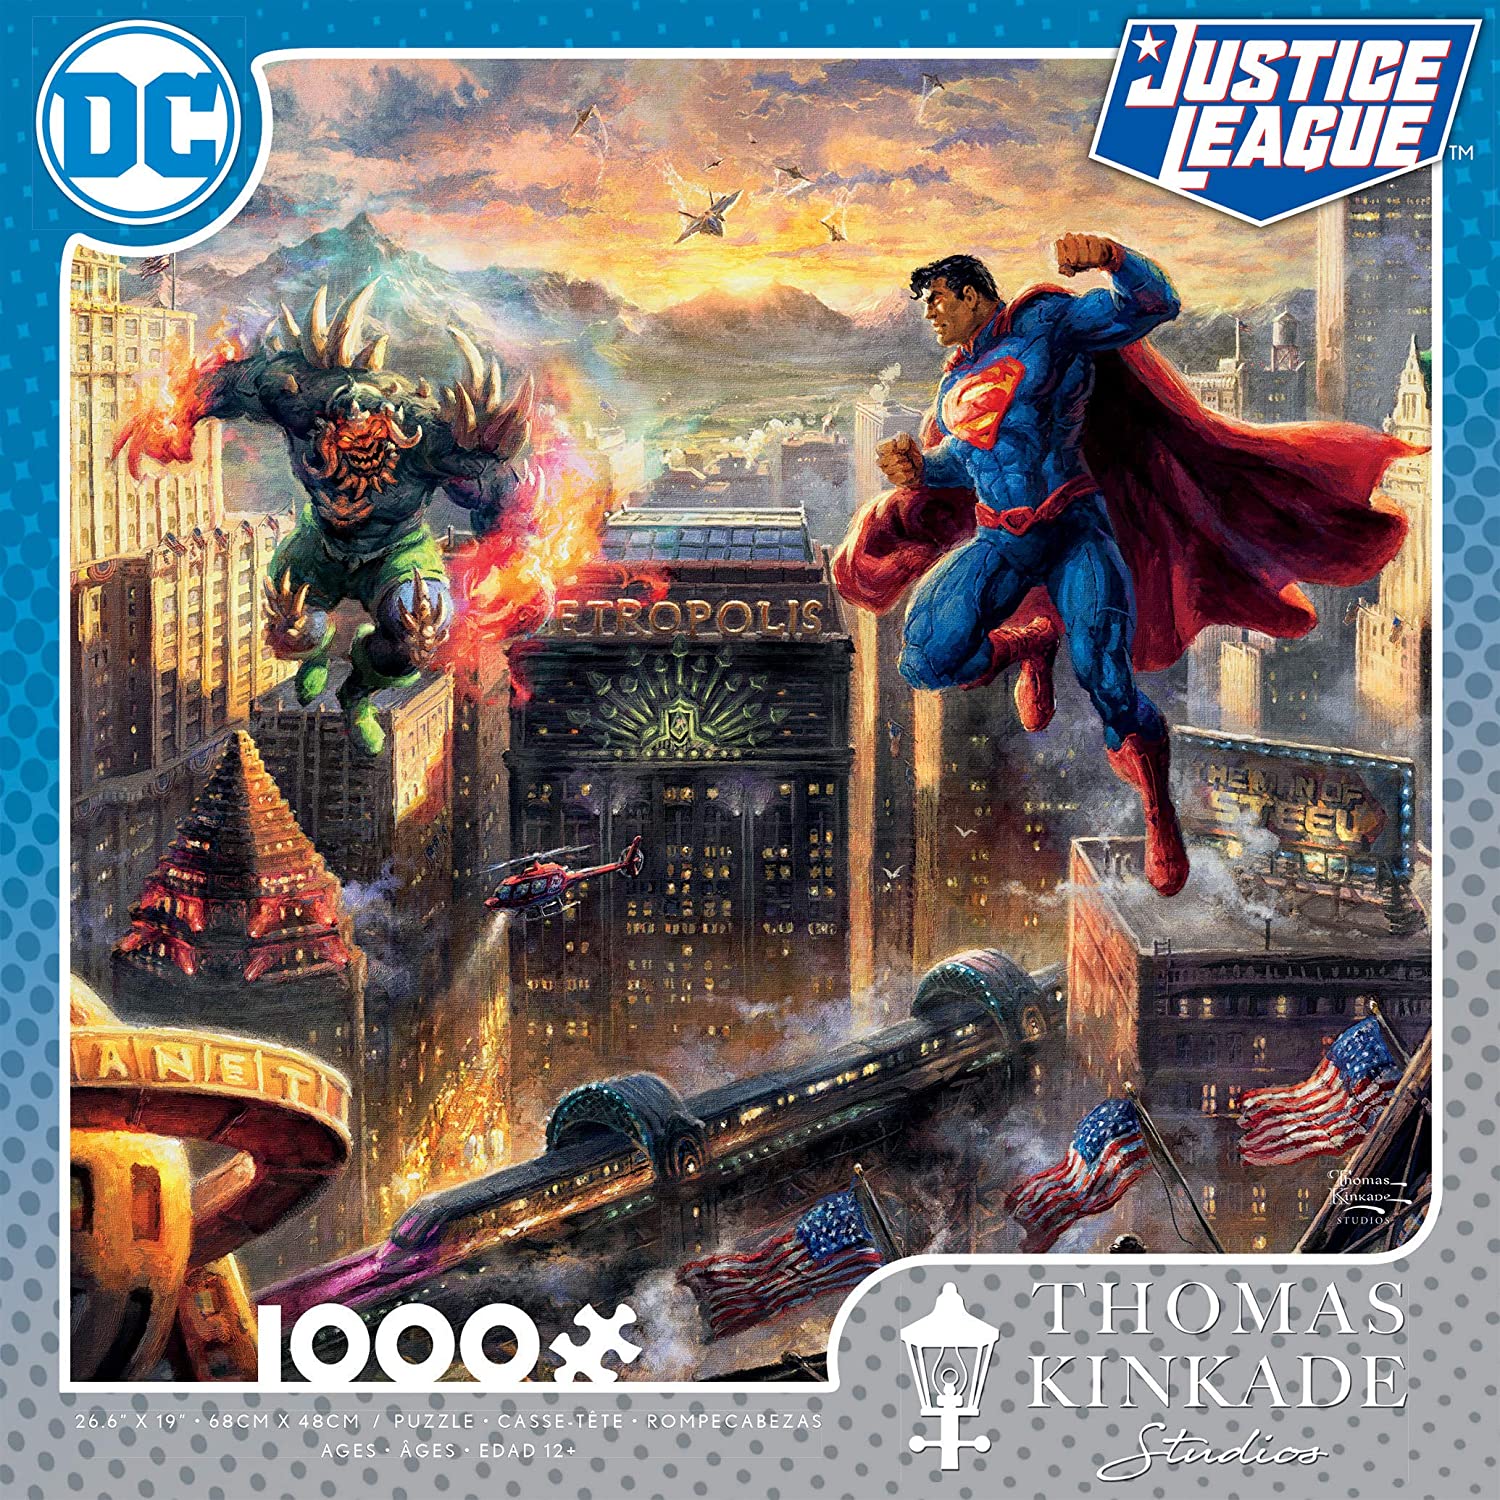 Thomas Kinkade - Justice League - DC Collection Superman - Man of Steel 1000 Piece Puzzle - Ceaco